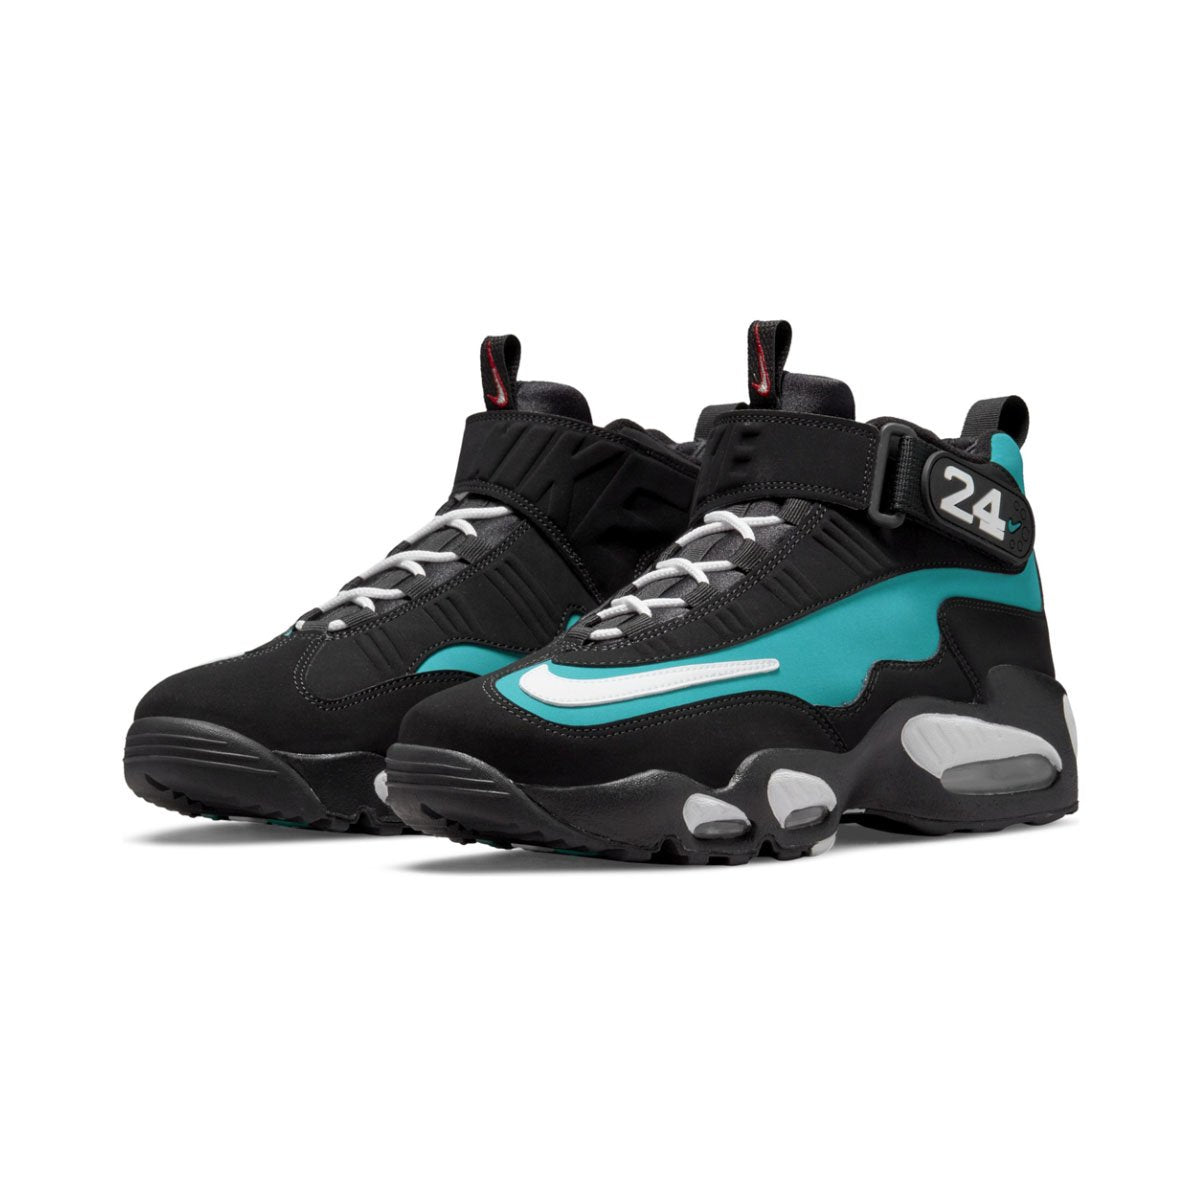 Big Kids' Nike Air Griffey Max 1 Casual Shoes